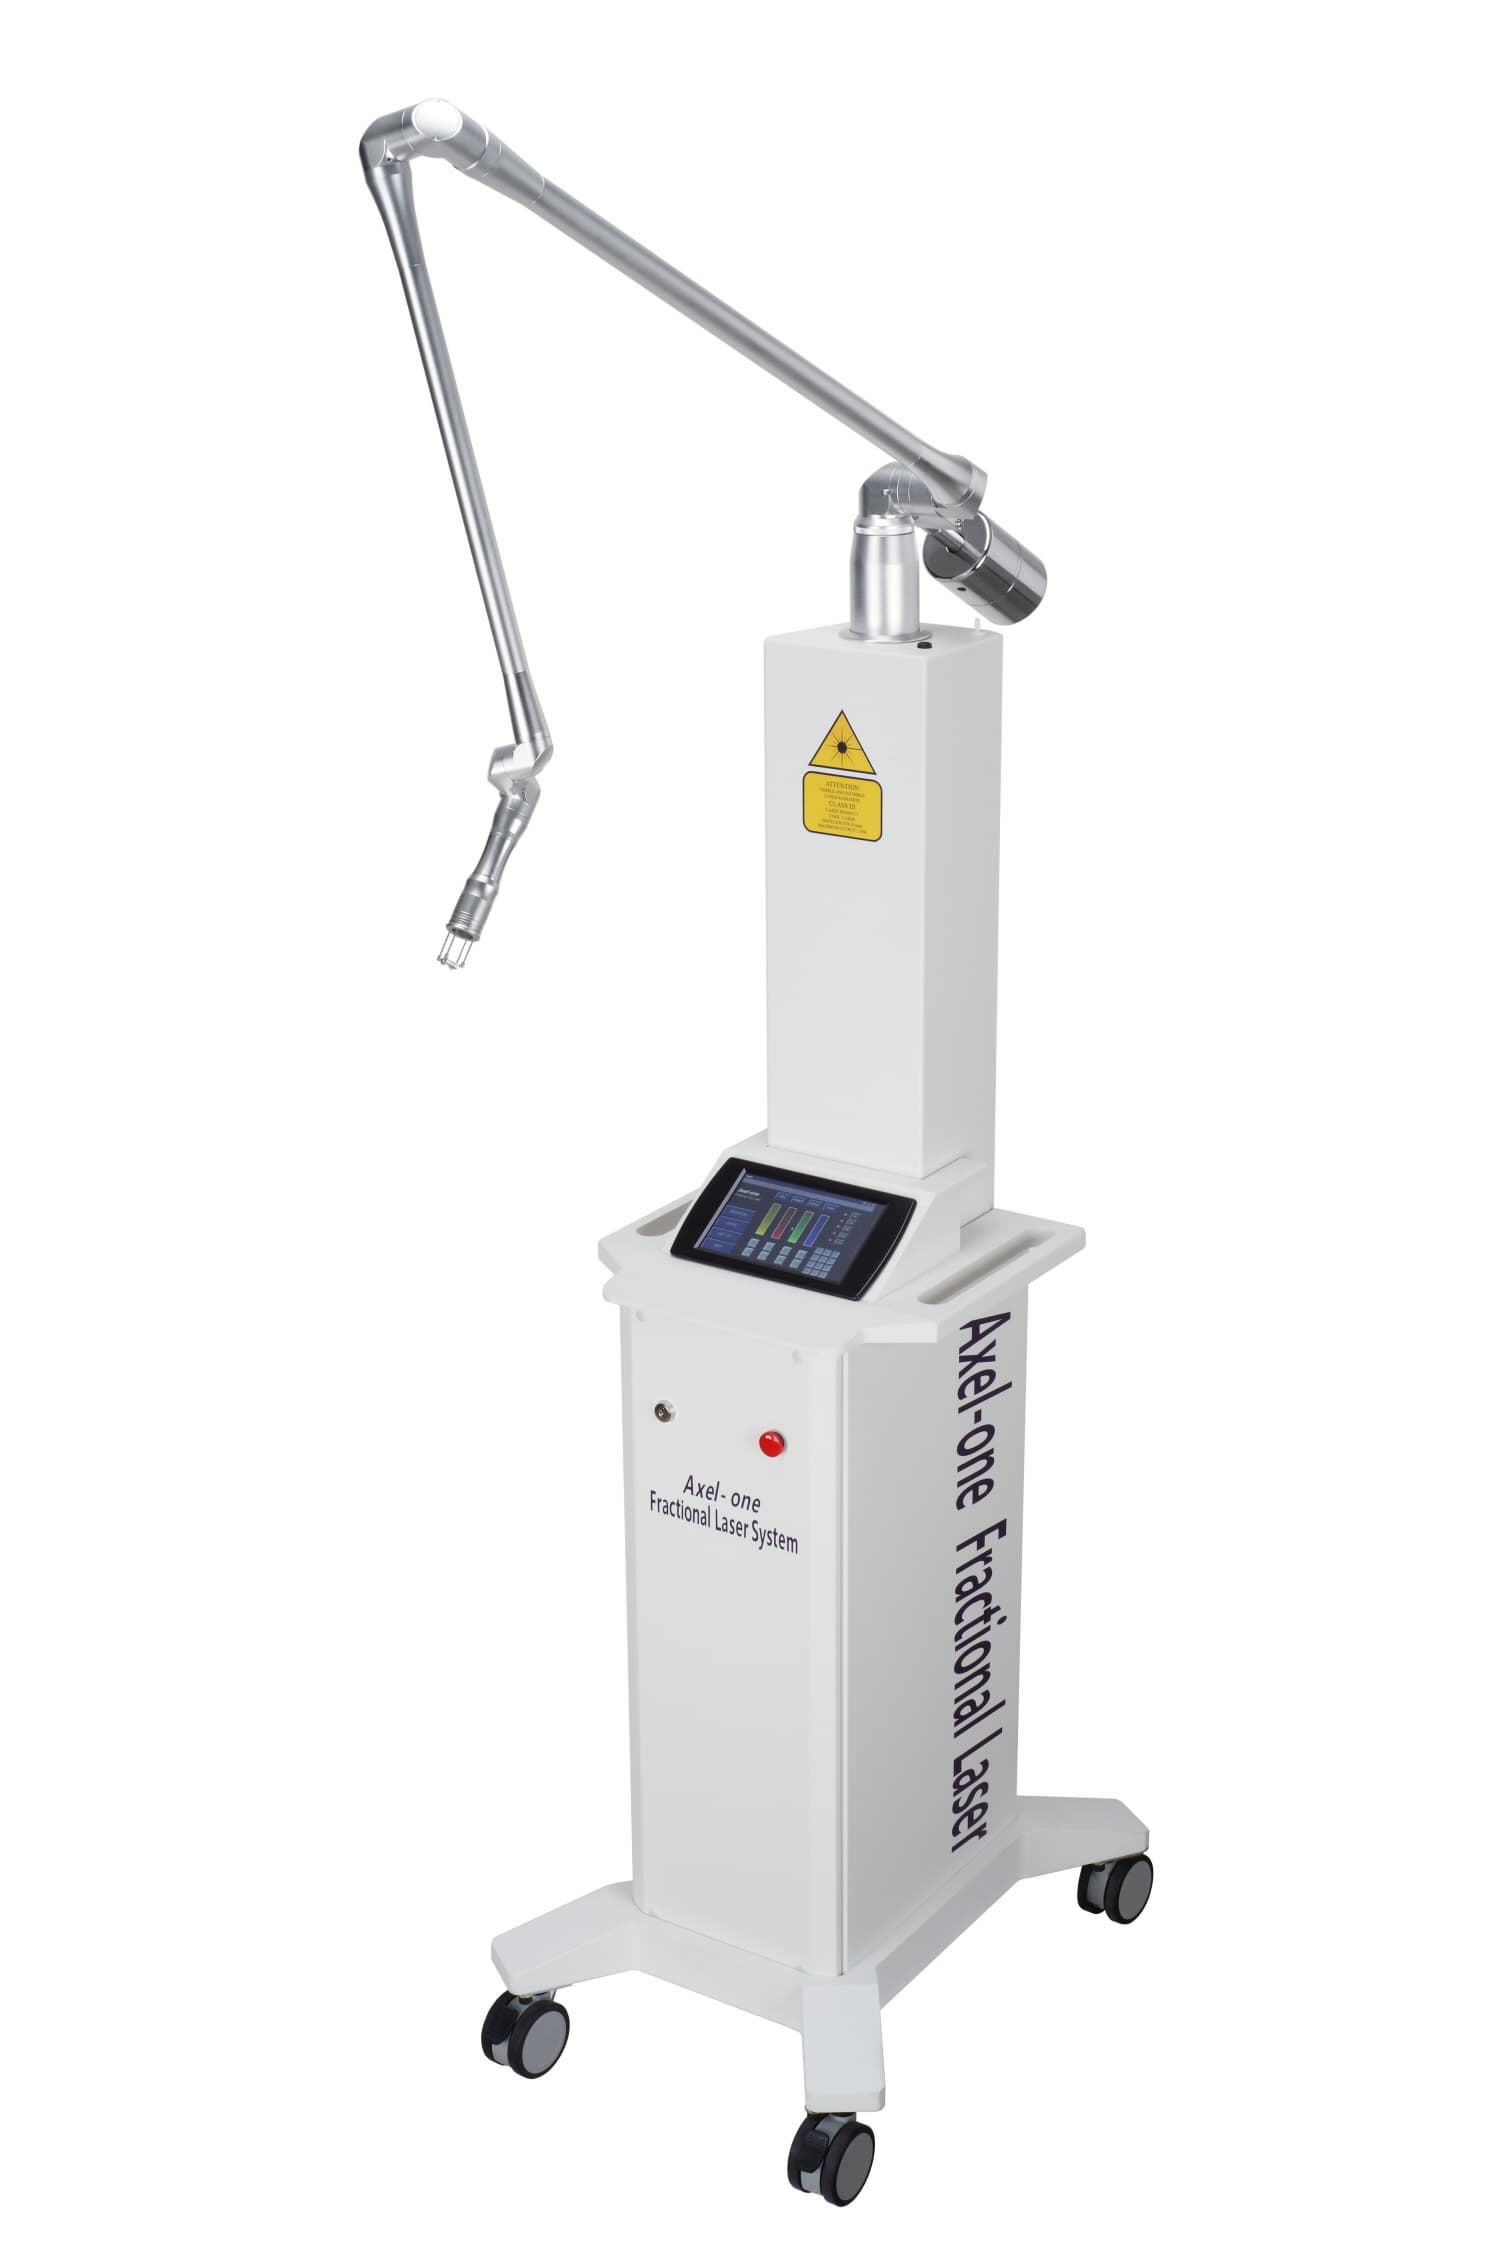 Axel-one fractional Co2 laser